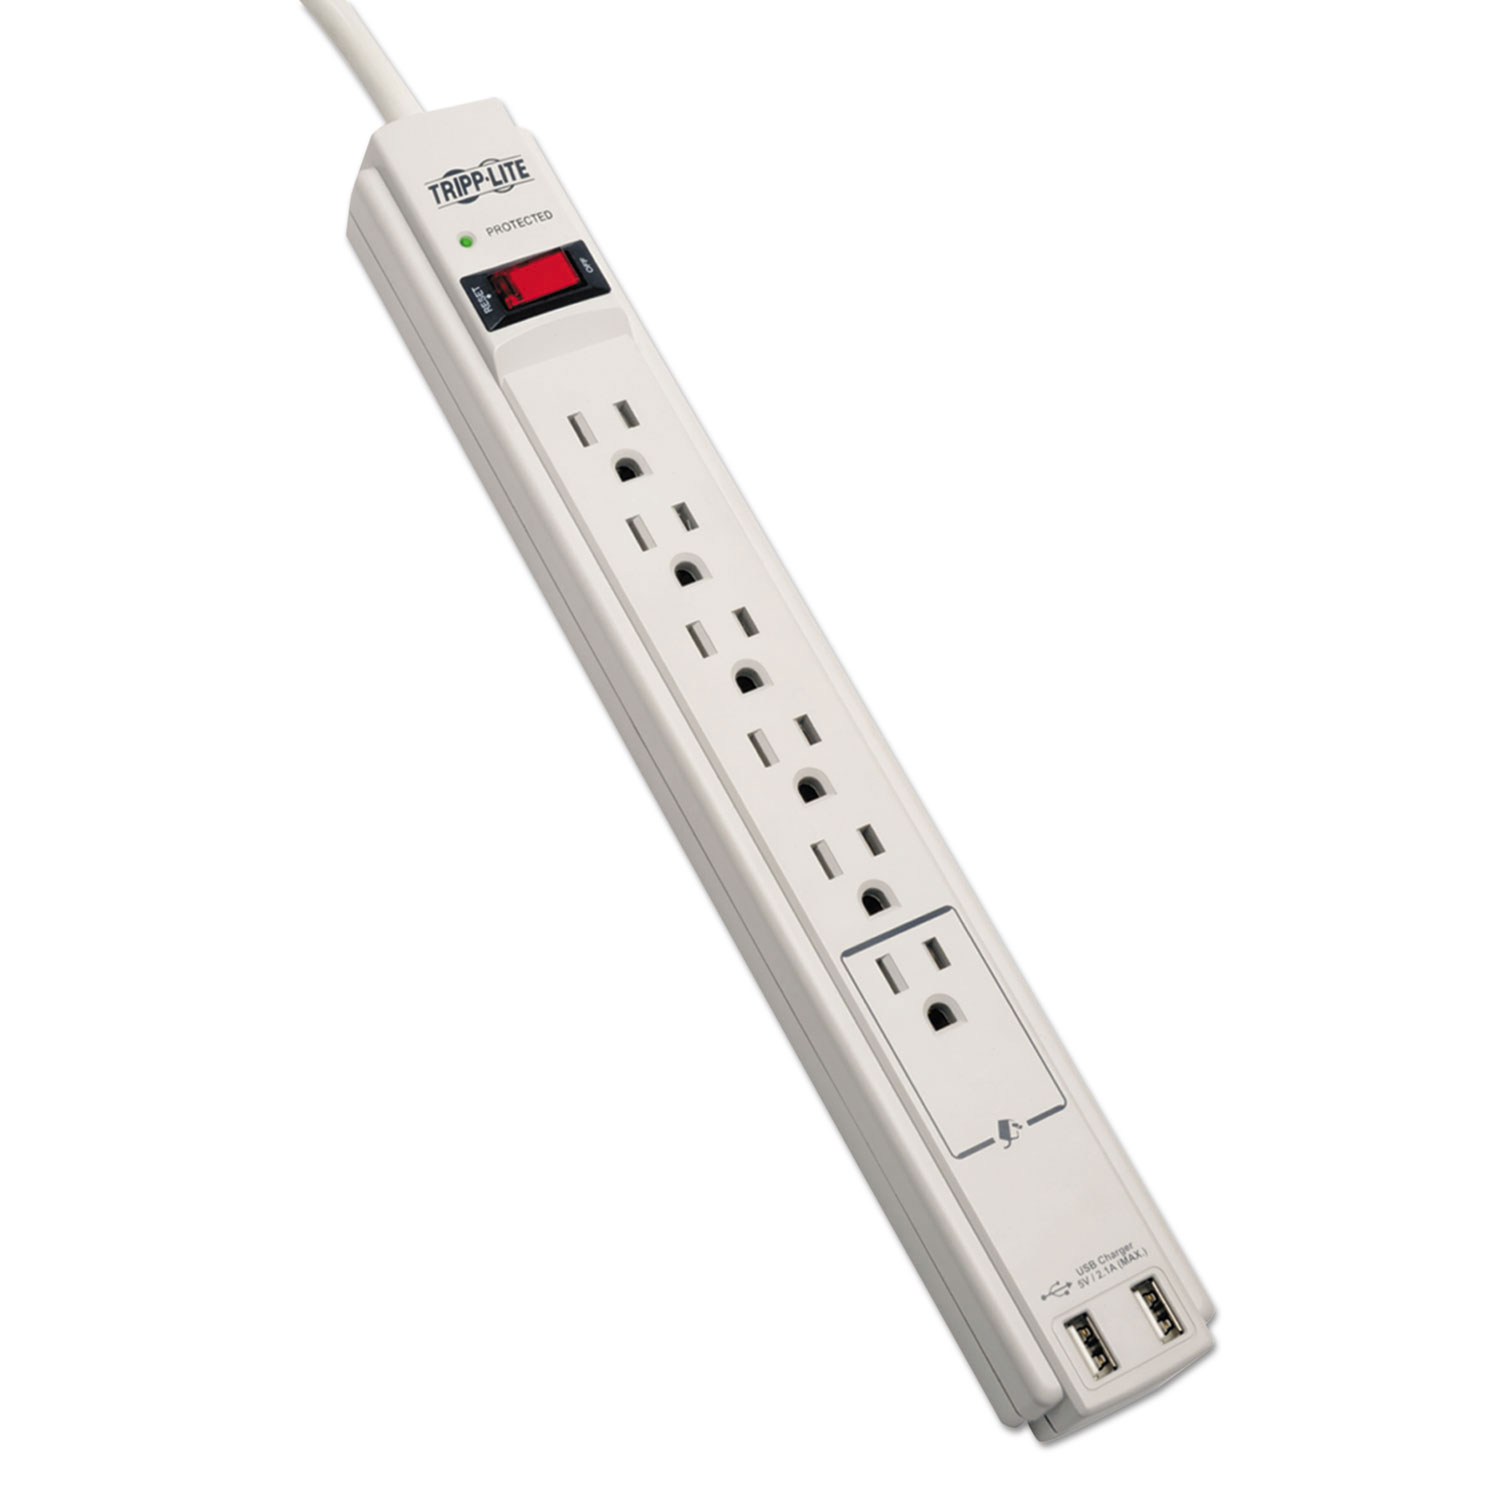 Protect It! Surge Protector, 6 Outlets/2 USB, 6 ft. Cord, 990 Joules, Gray